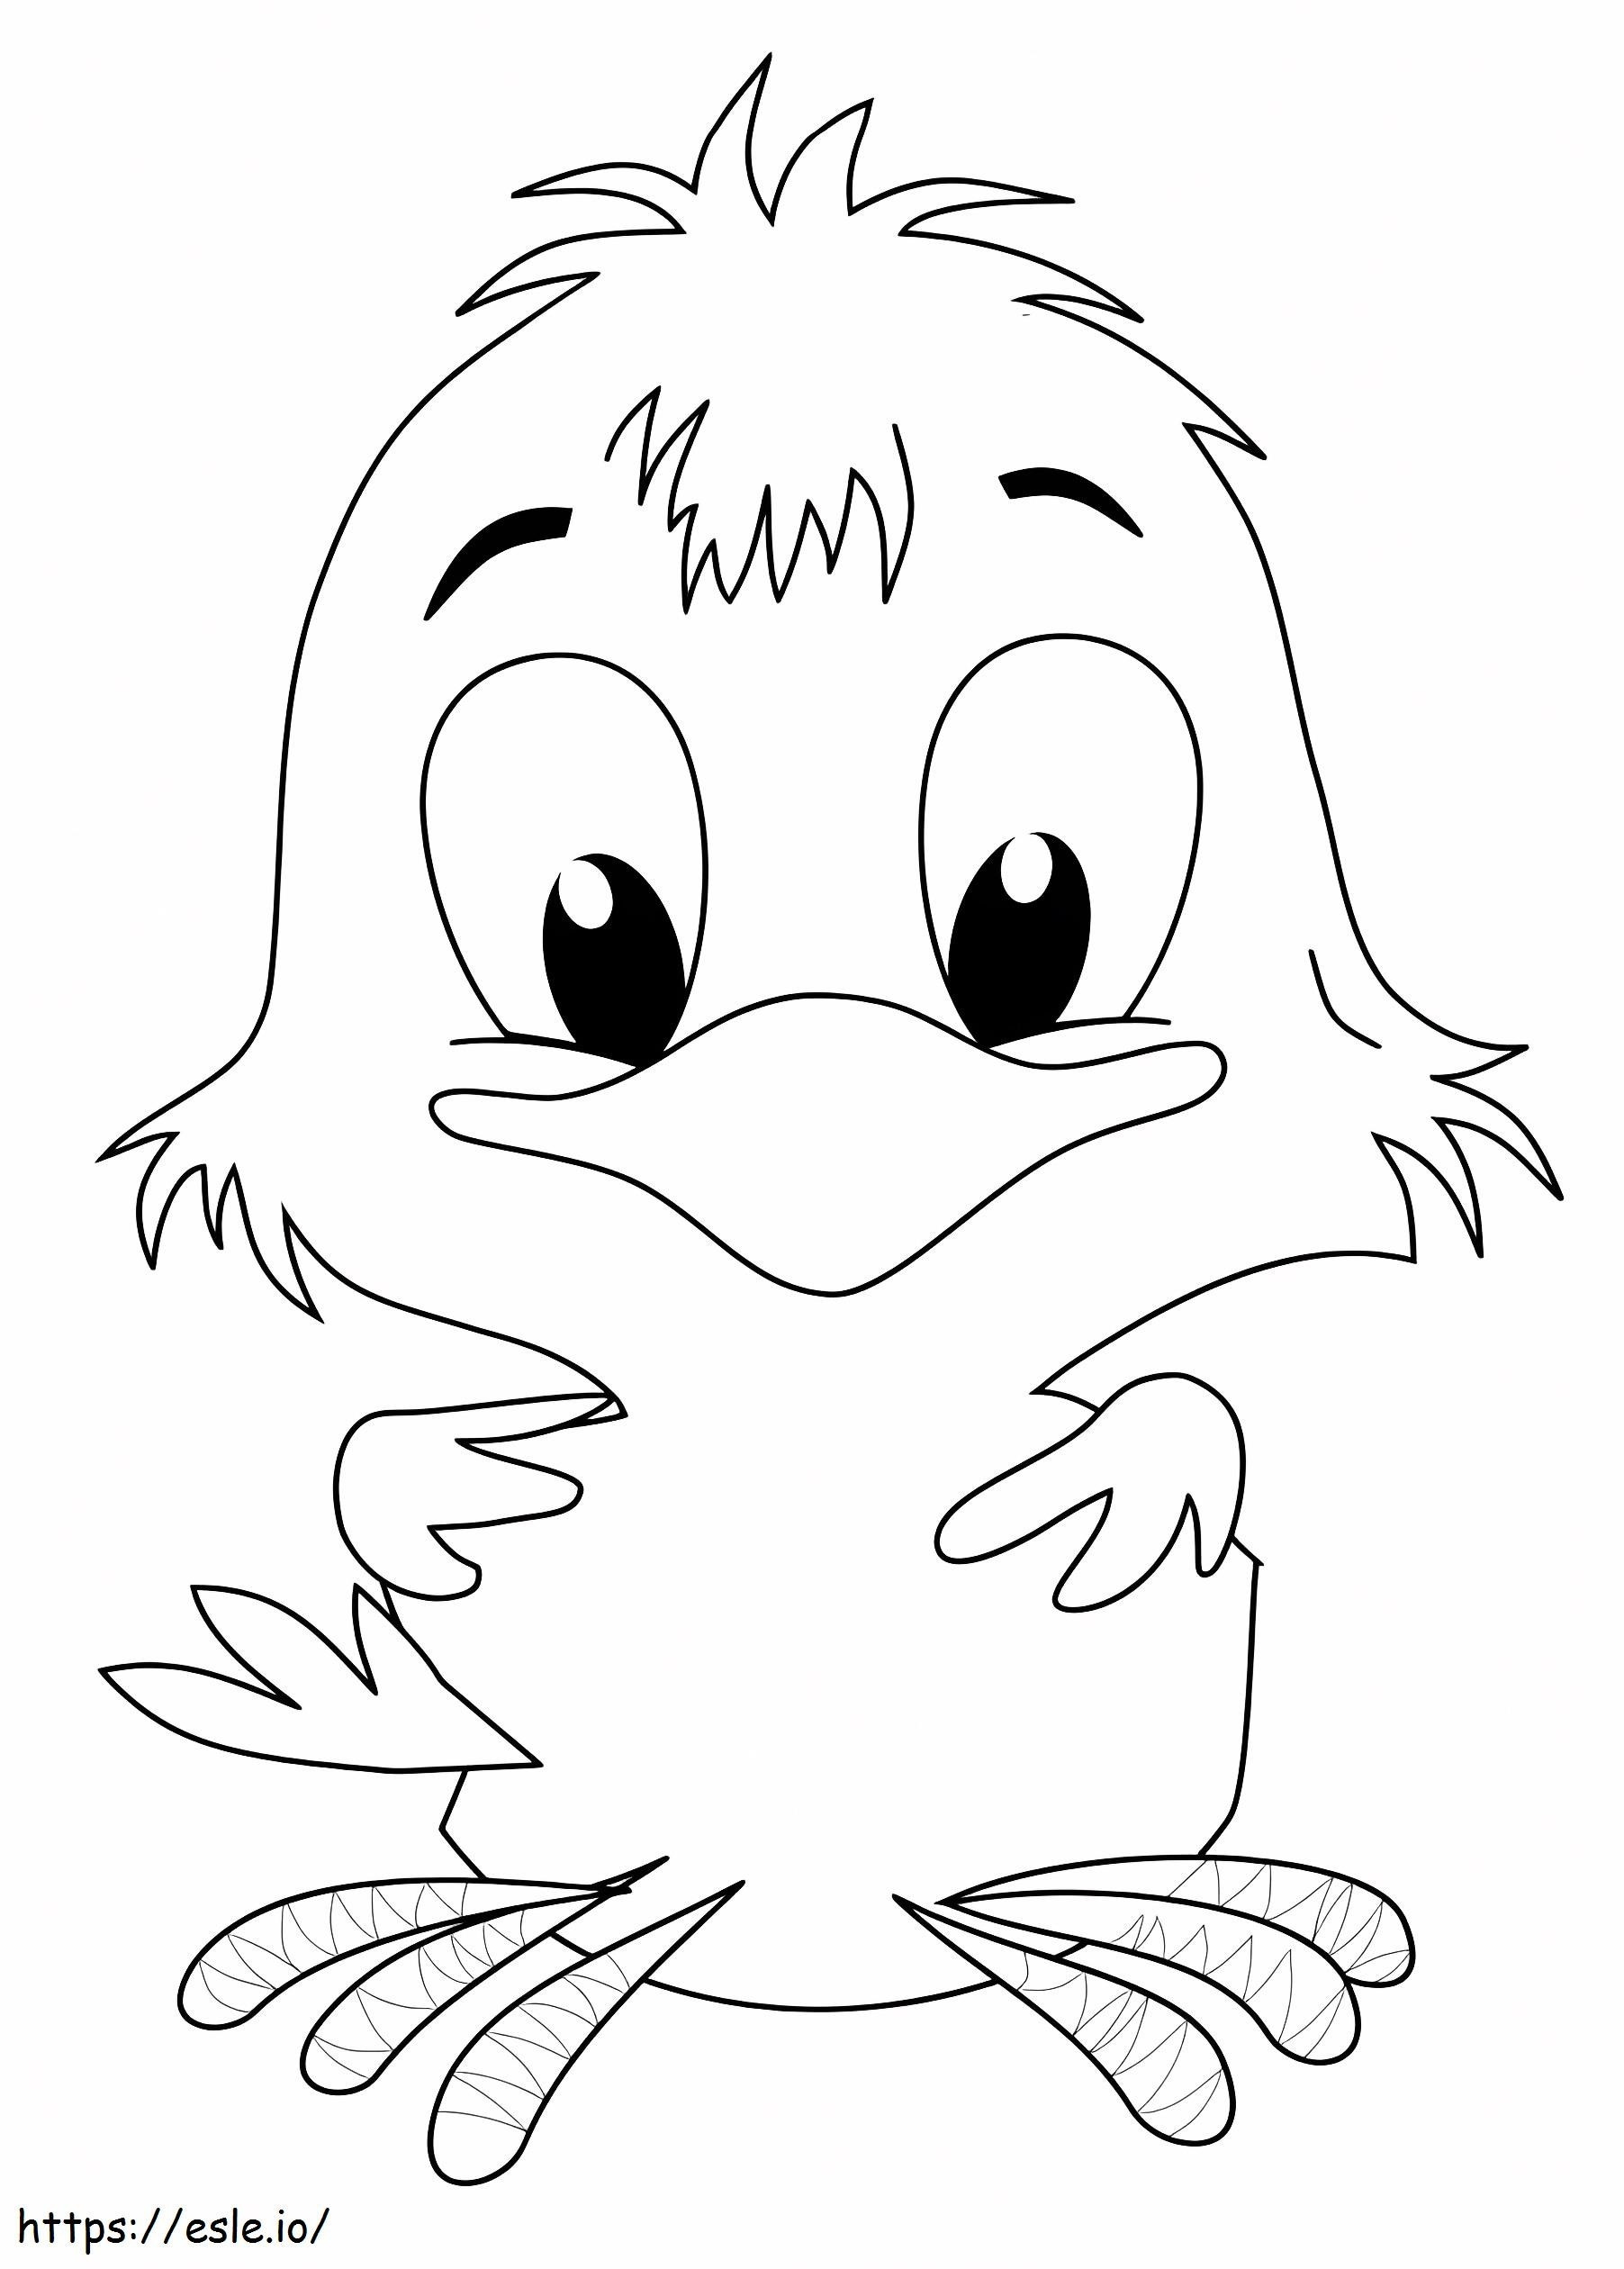 1560325316 Chick A4 coloring page